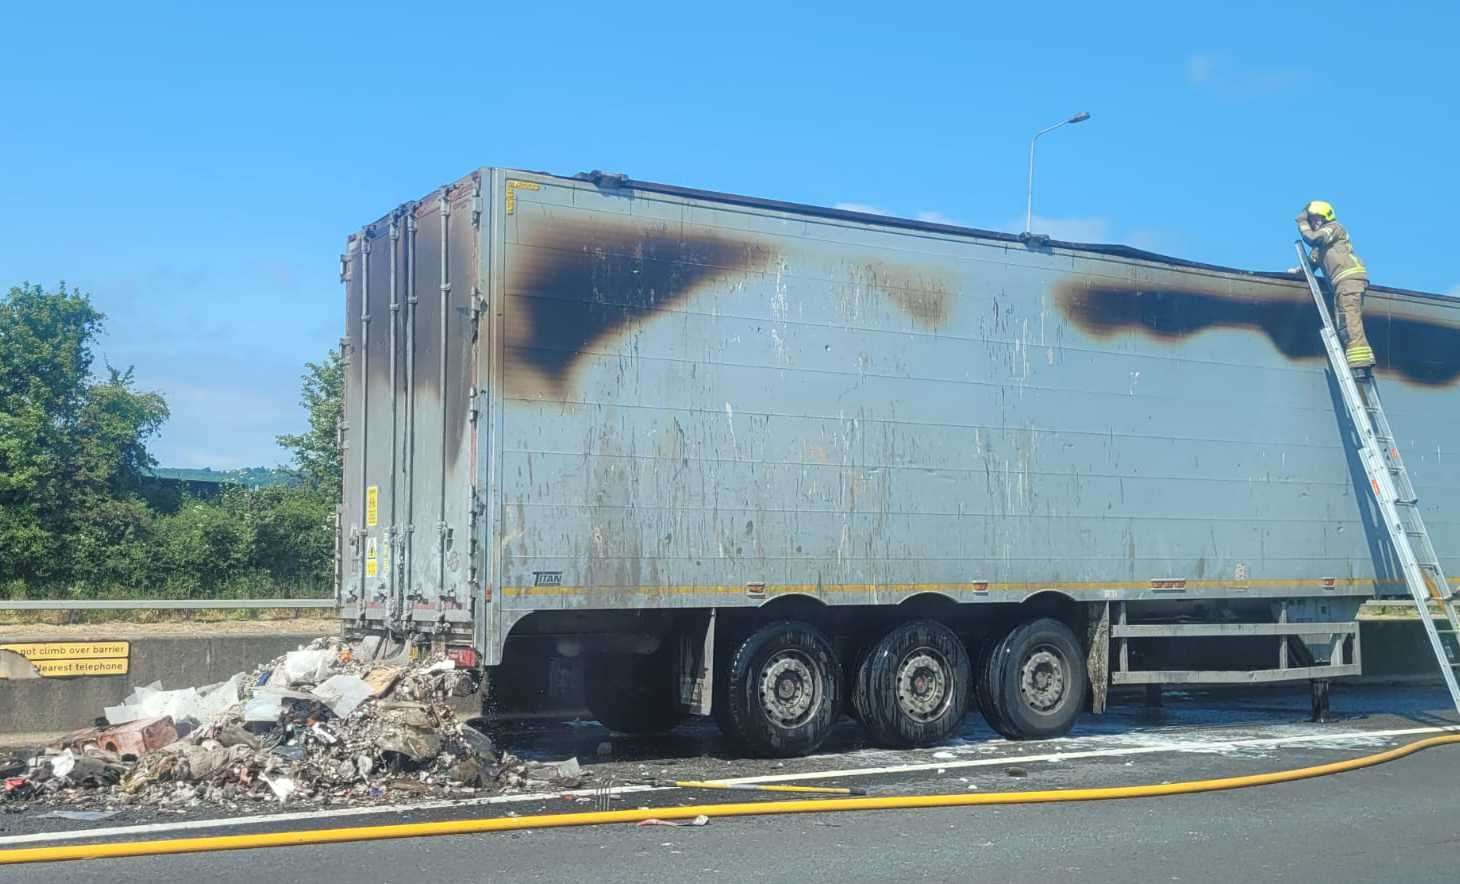 The lorry fire caused major delays for motorists